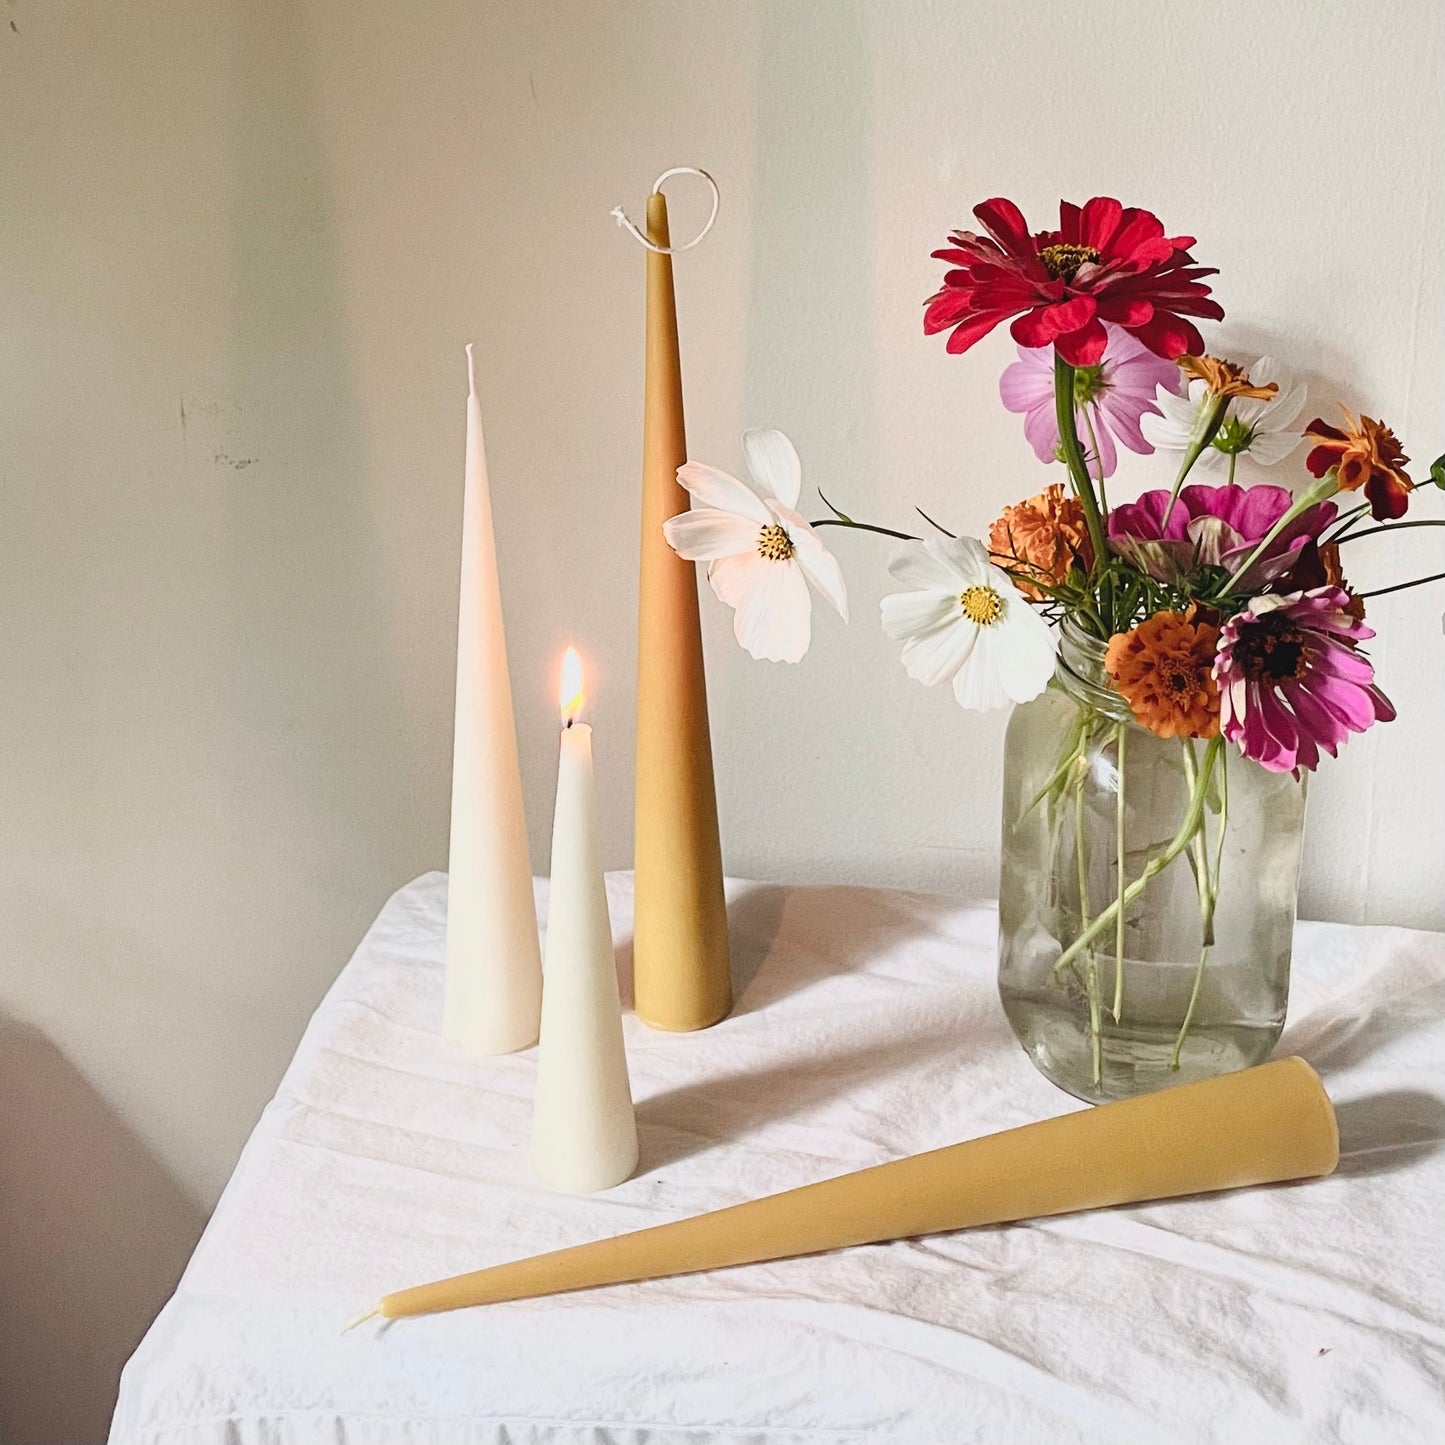 Reserved for Cristina -  Holiday Beeswax Cone Candles - Beeswax Cone Candles // Candle, Modern Tapers